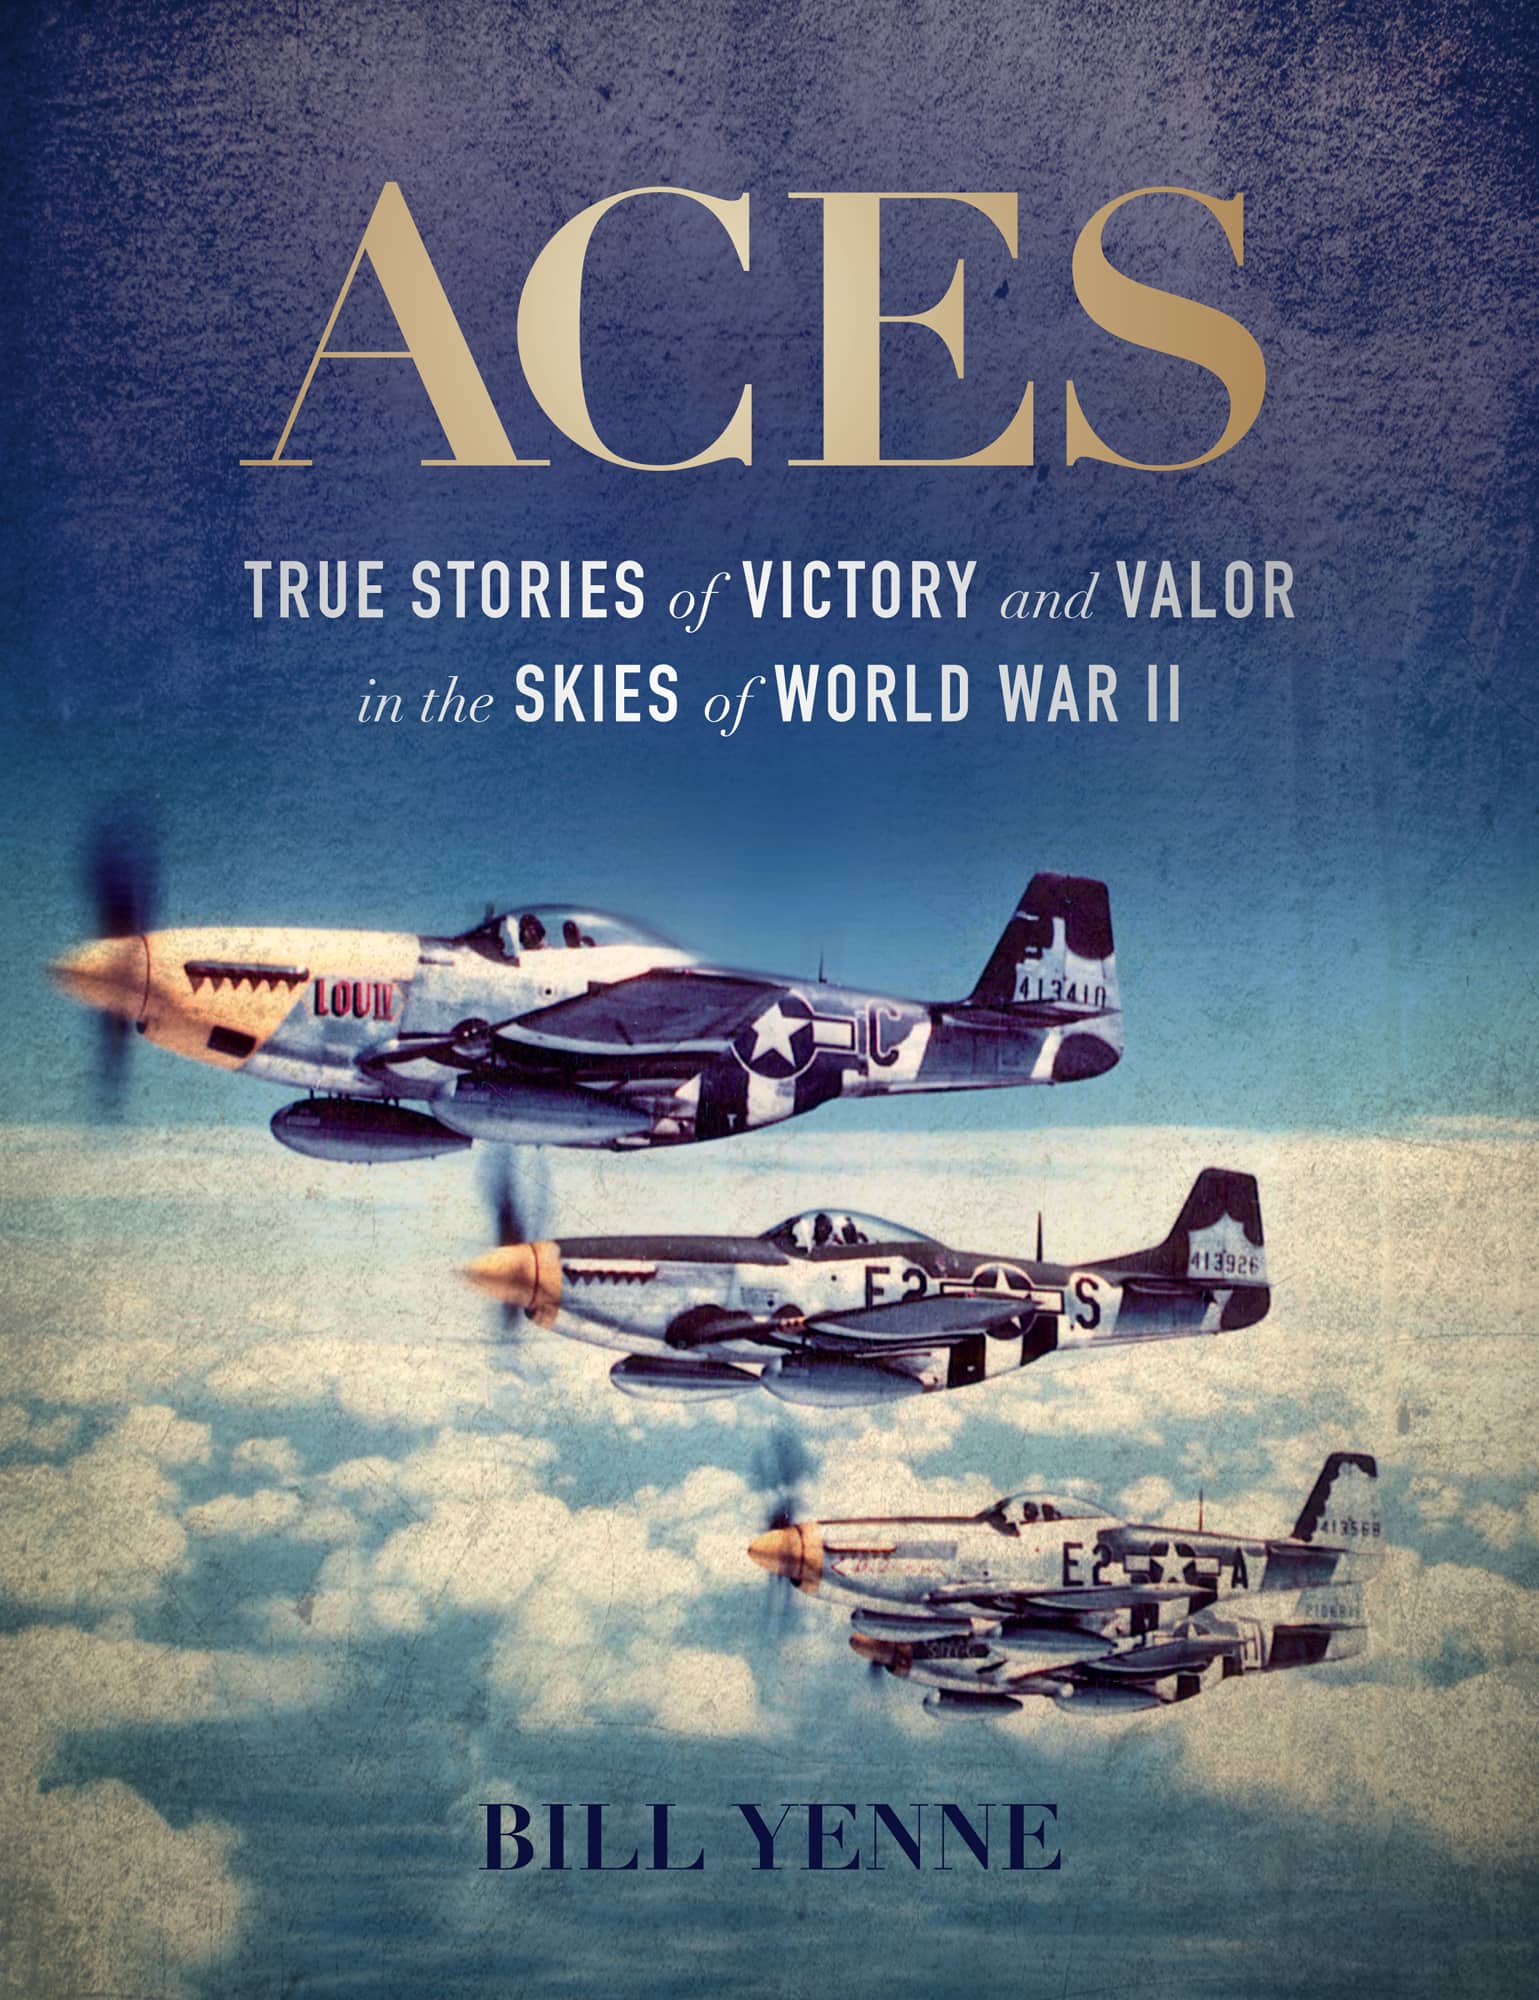 ACES TRUE STORIES of VICTORY and VALOR in the SKIES of WORLD WAR II BILL YENNE - photo 1